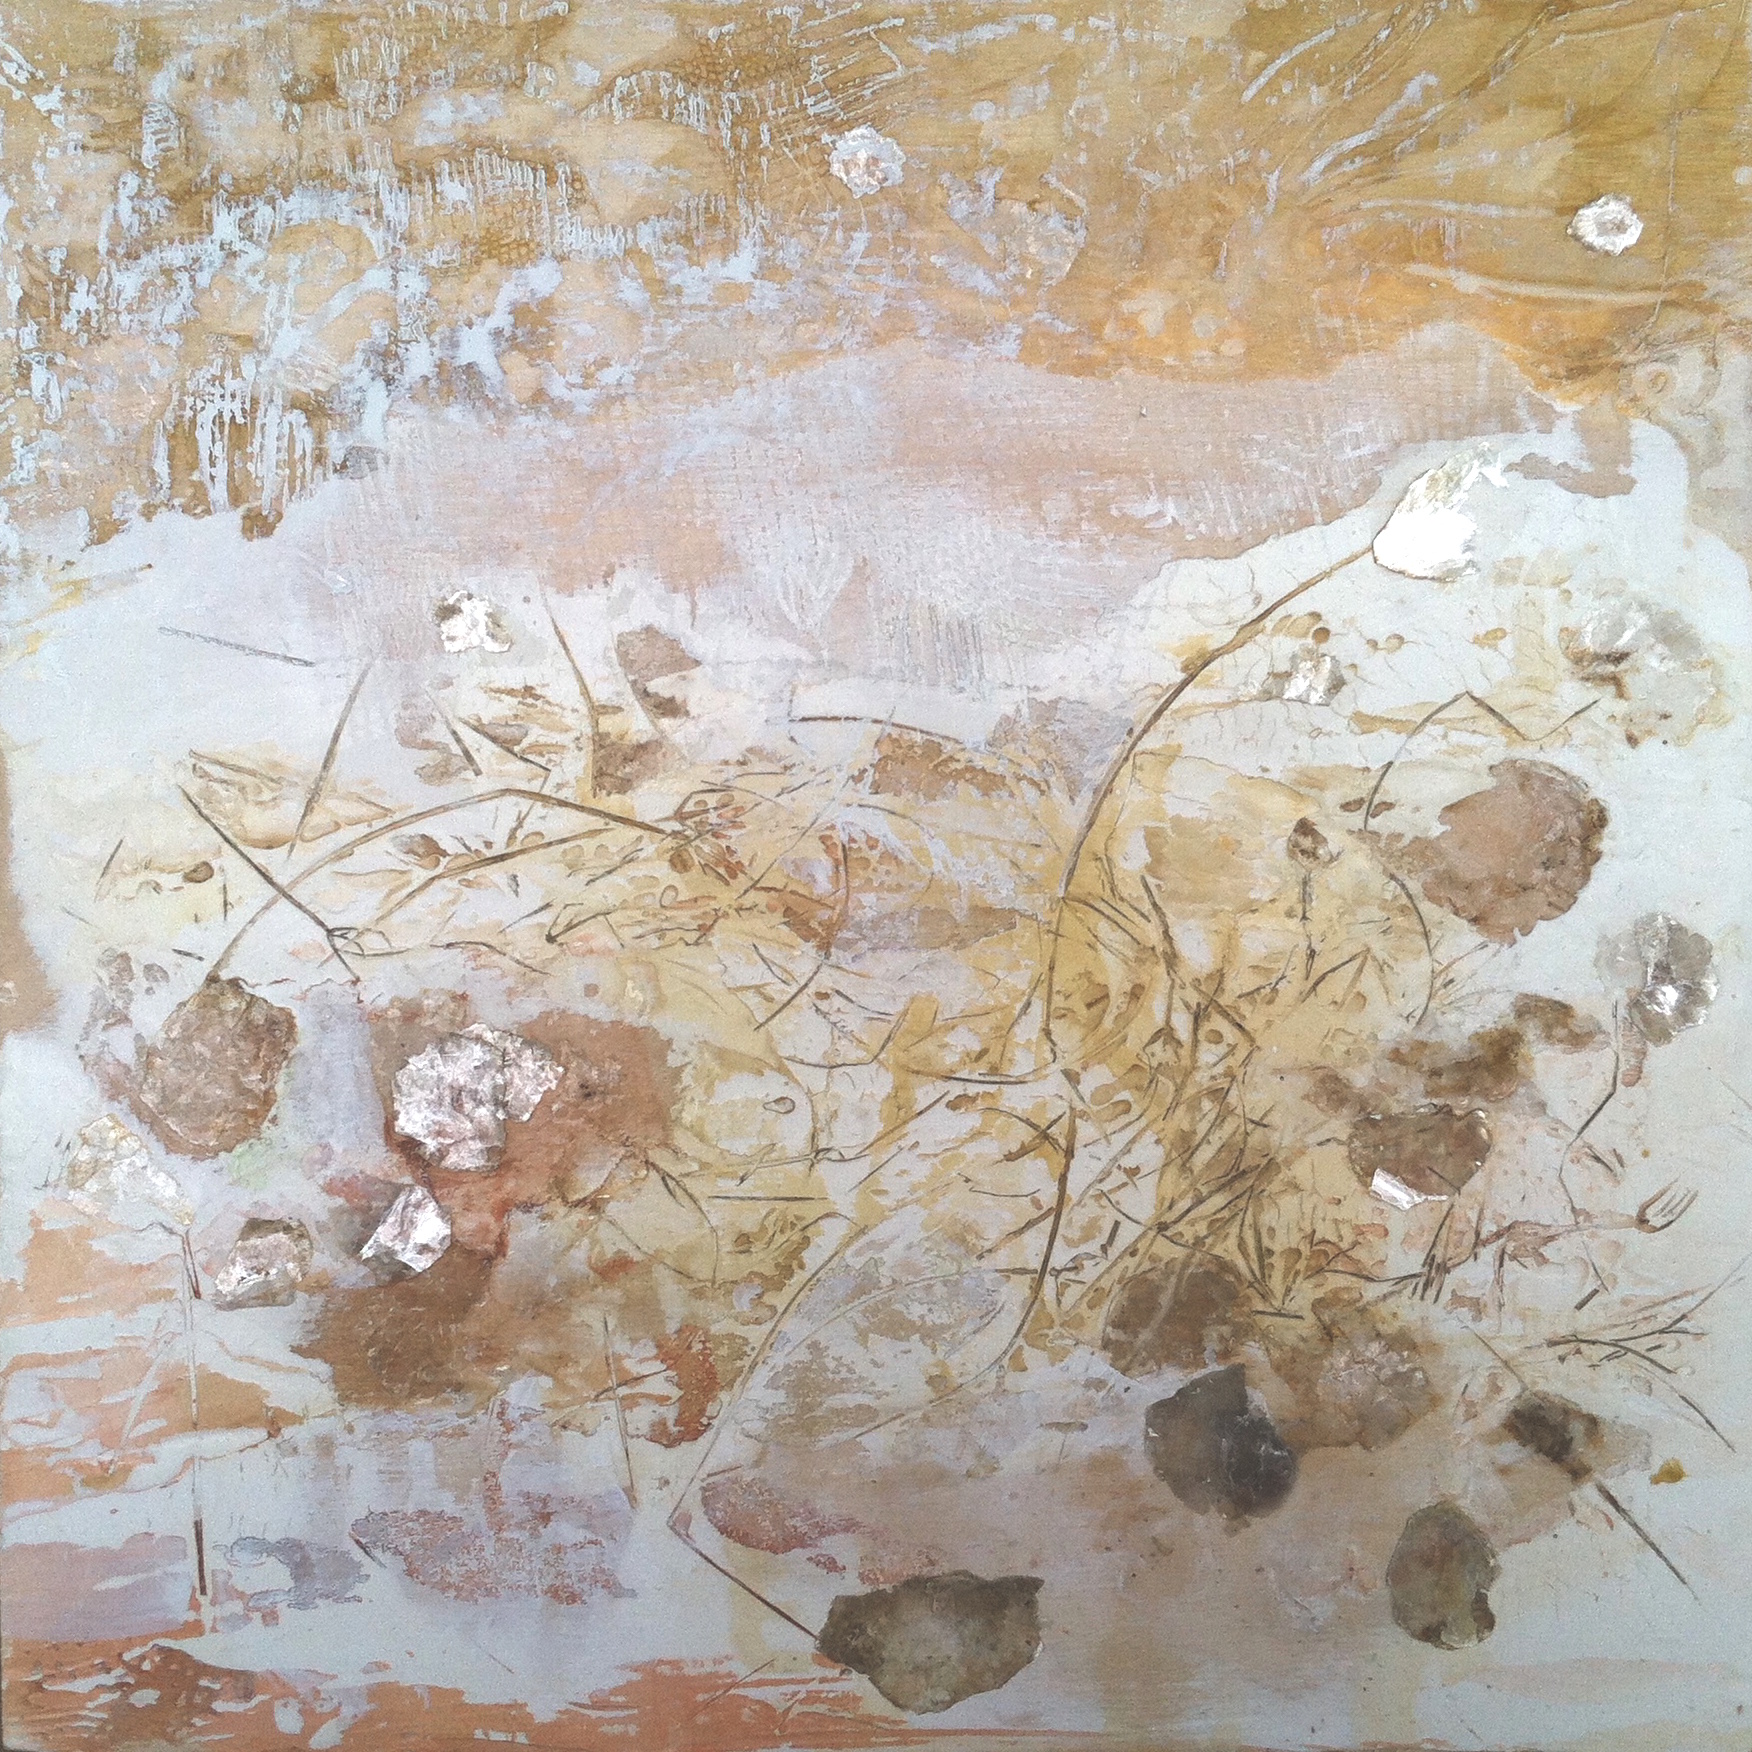   Dunes in Winter   12”sq. Mixed Media on Wood Panel 